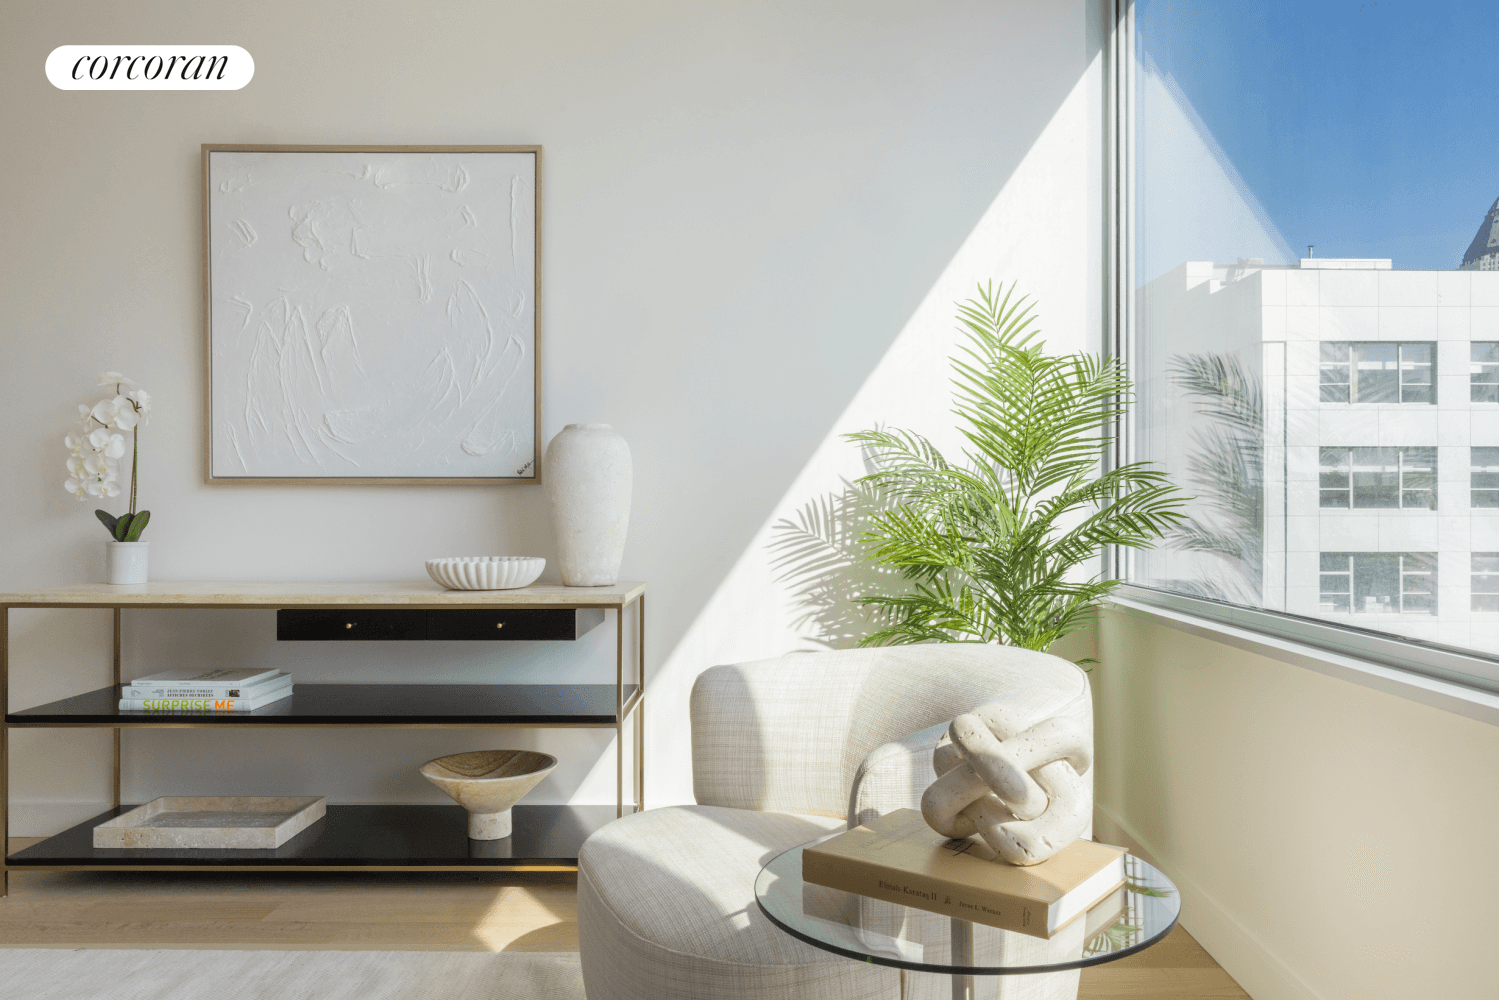 Immediate Occupancy 4 Commission Designed by renowned architect Alvaro Siza with interiors by Gabellini Sheppard, residence 5E is a 1, 131 SF split two bedroom, two and a half bathroom ...